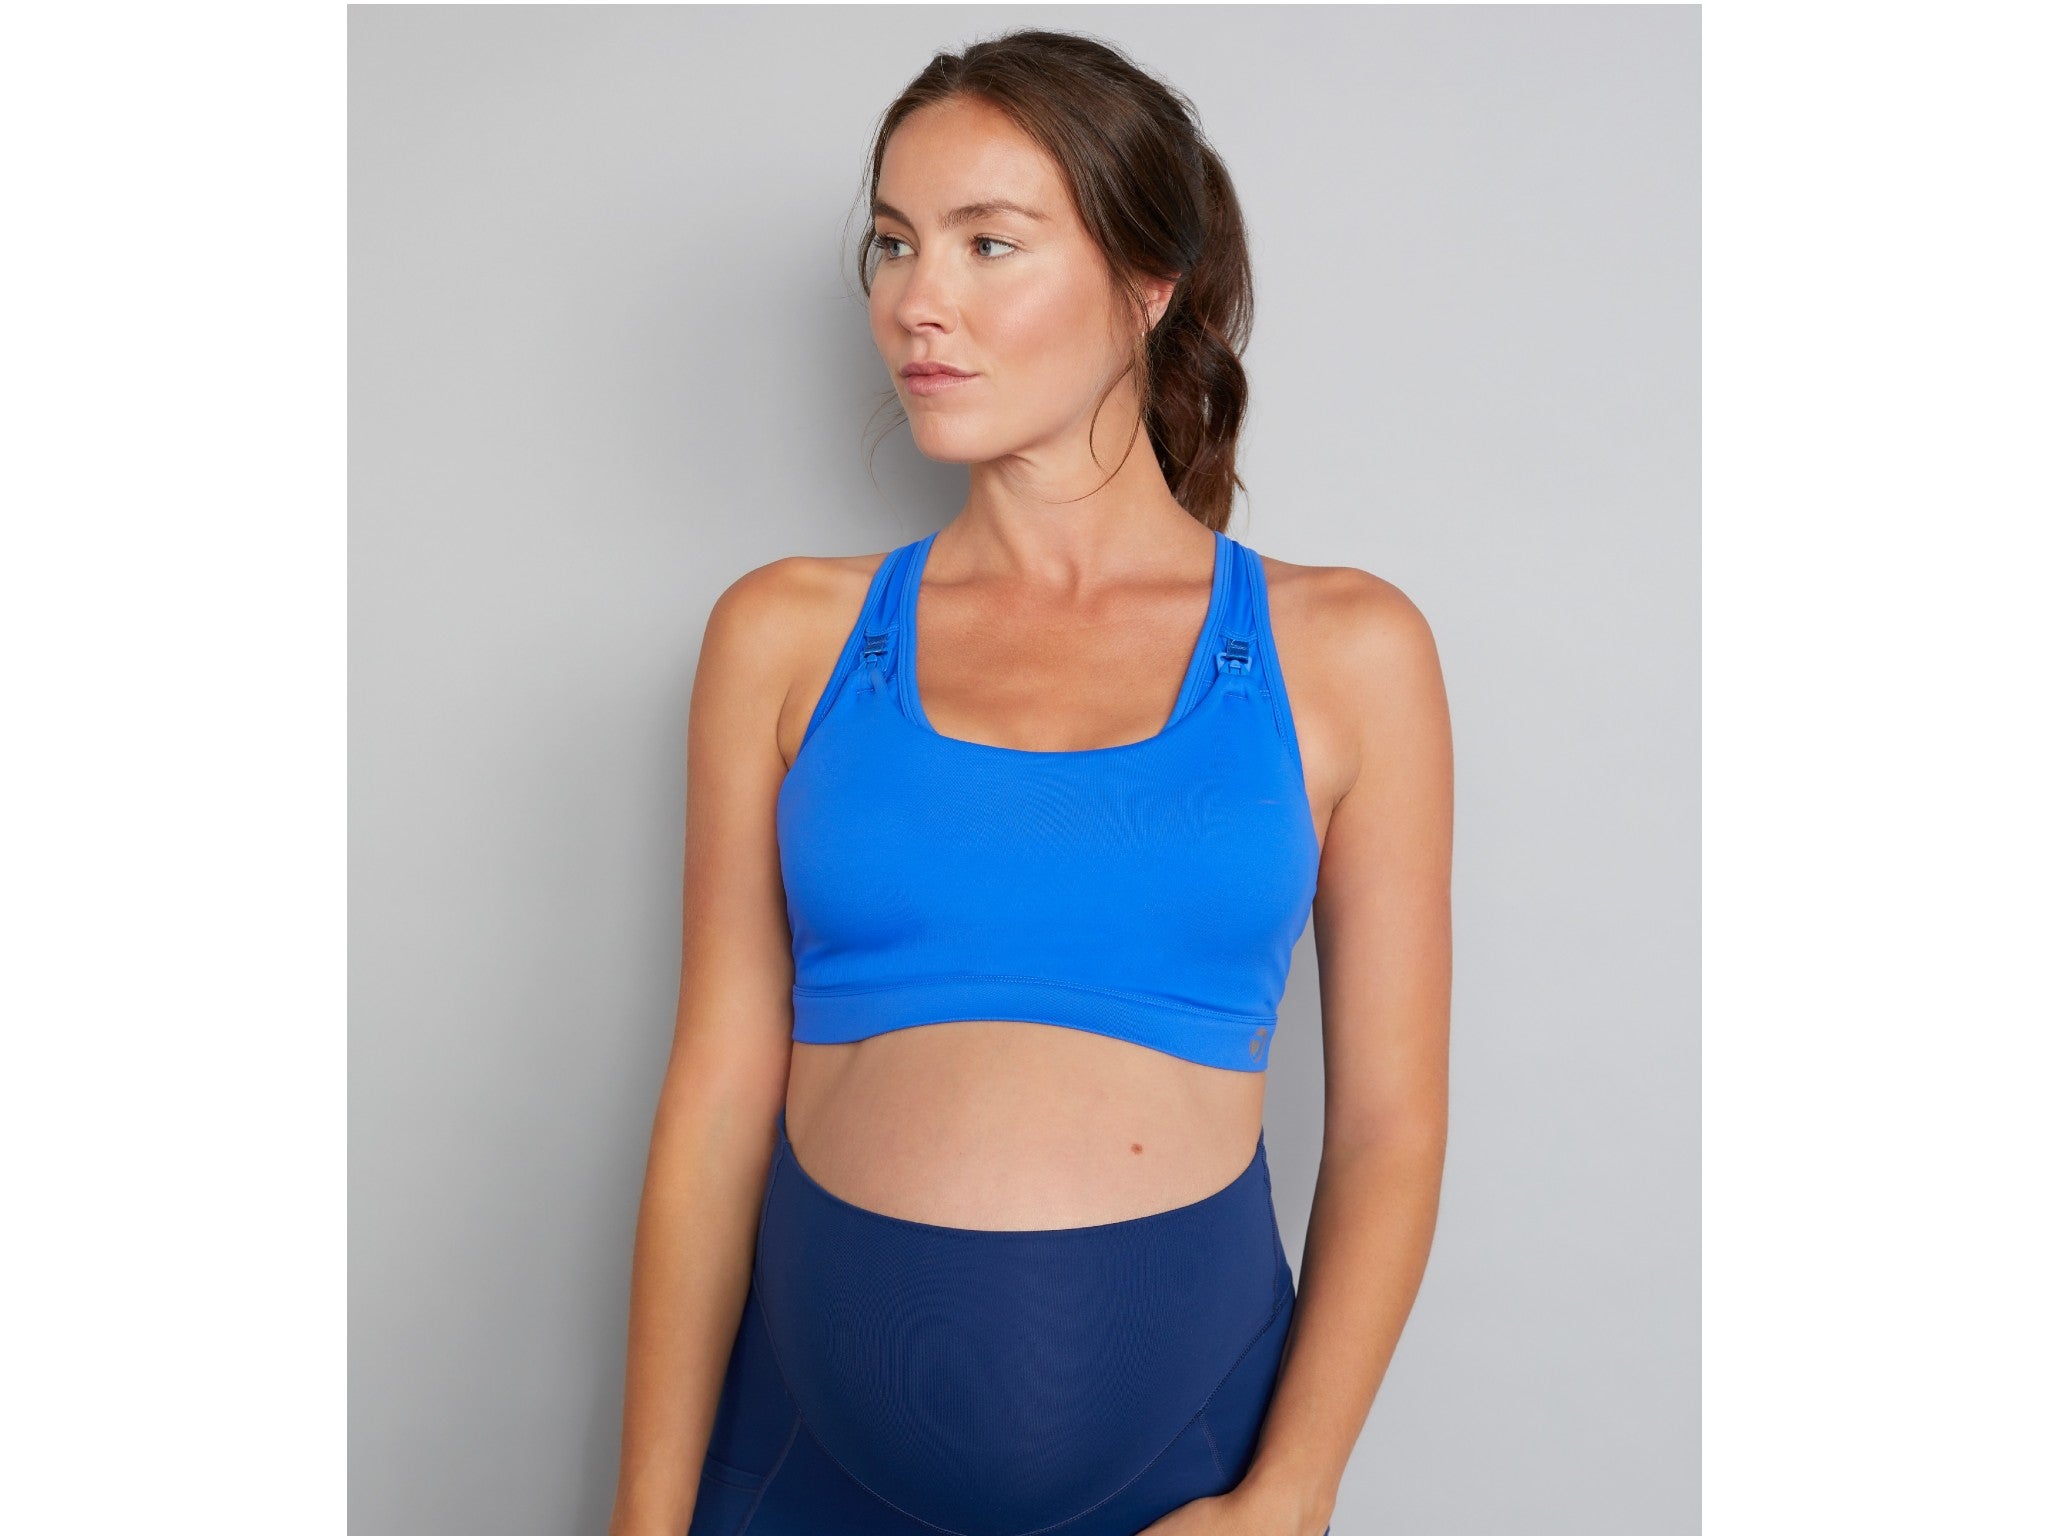 The 10 Best Sports Bras for Teens That Are Comfortable, Functional